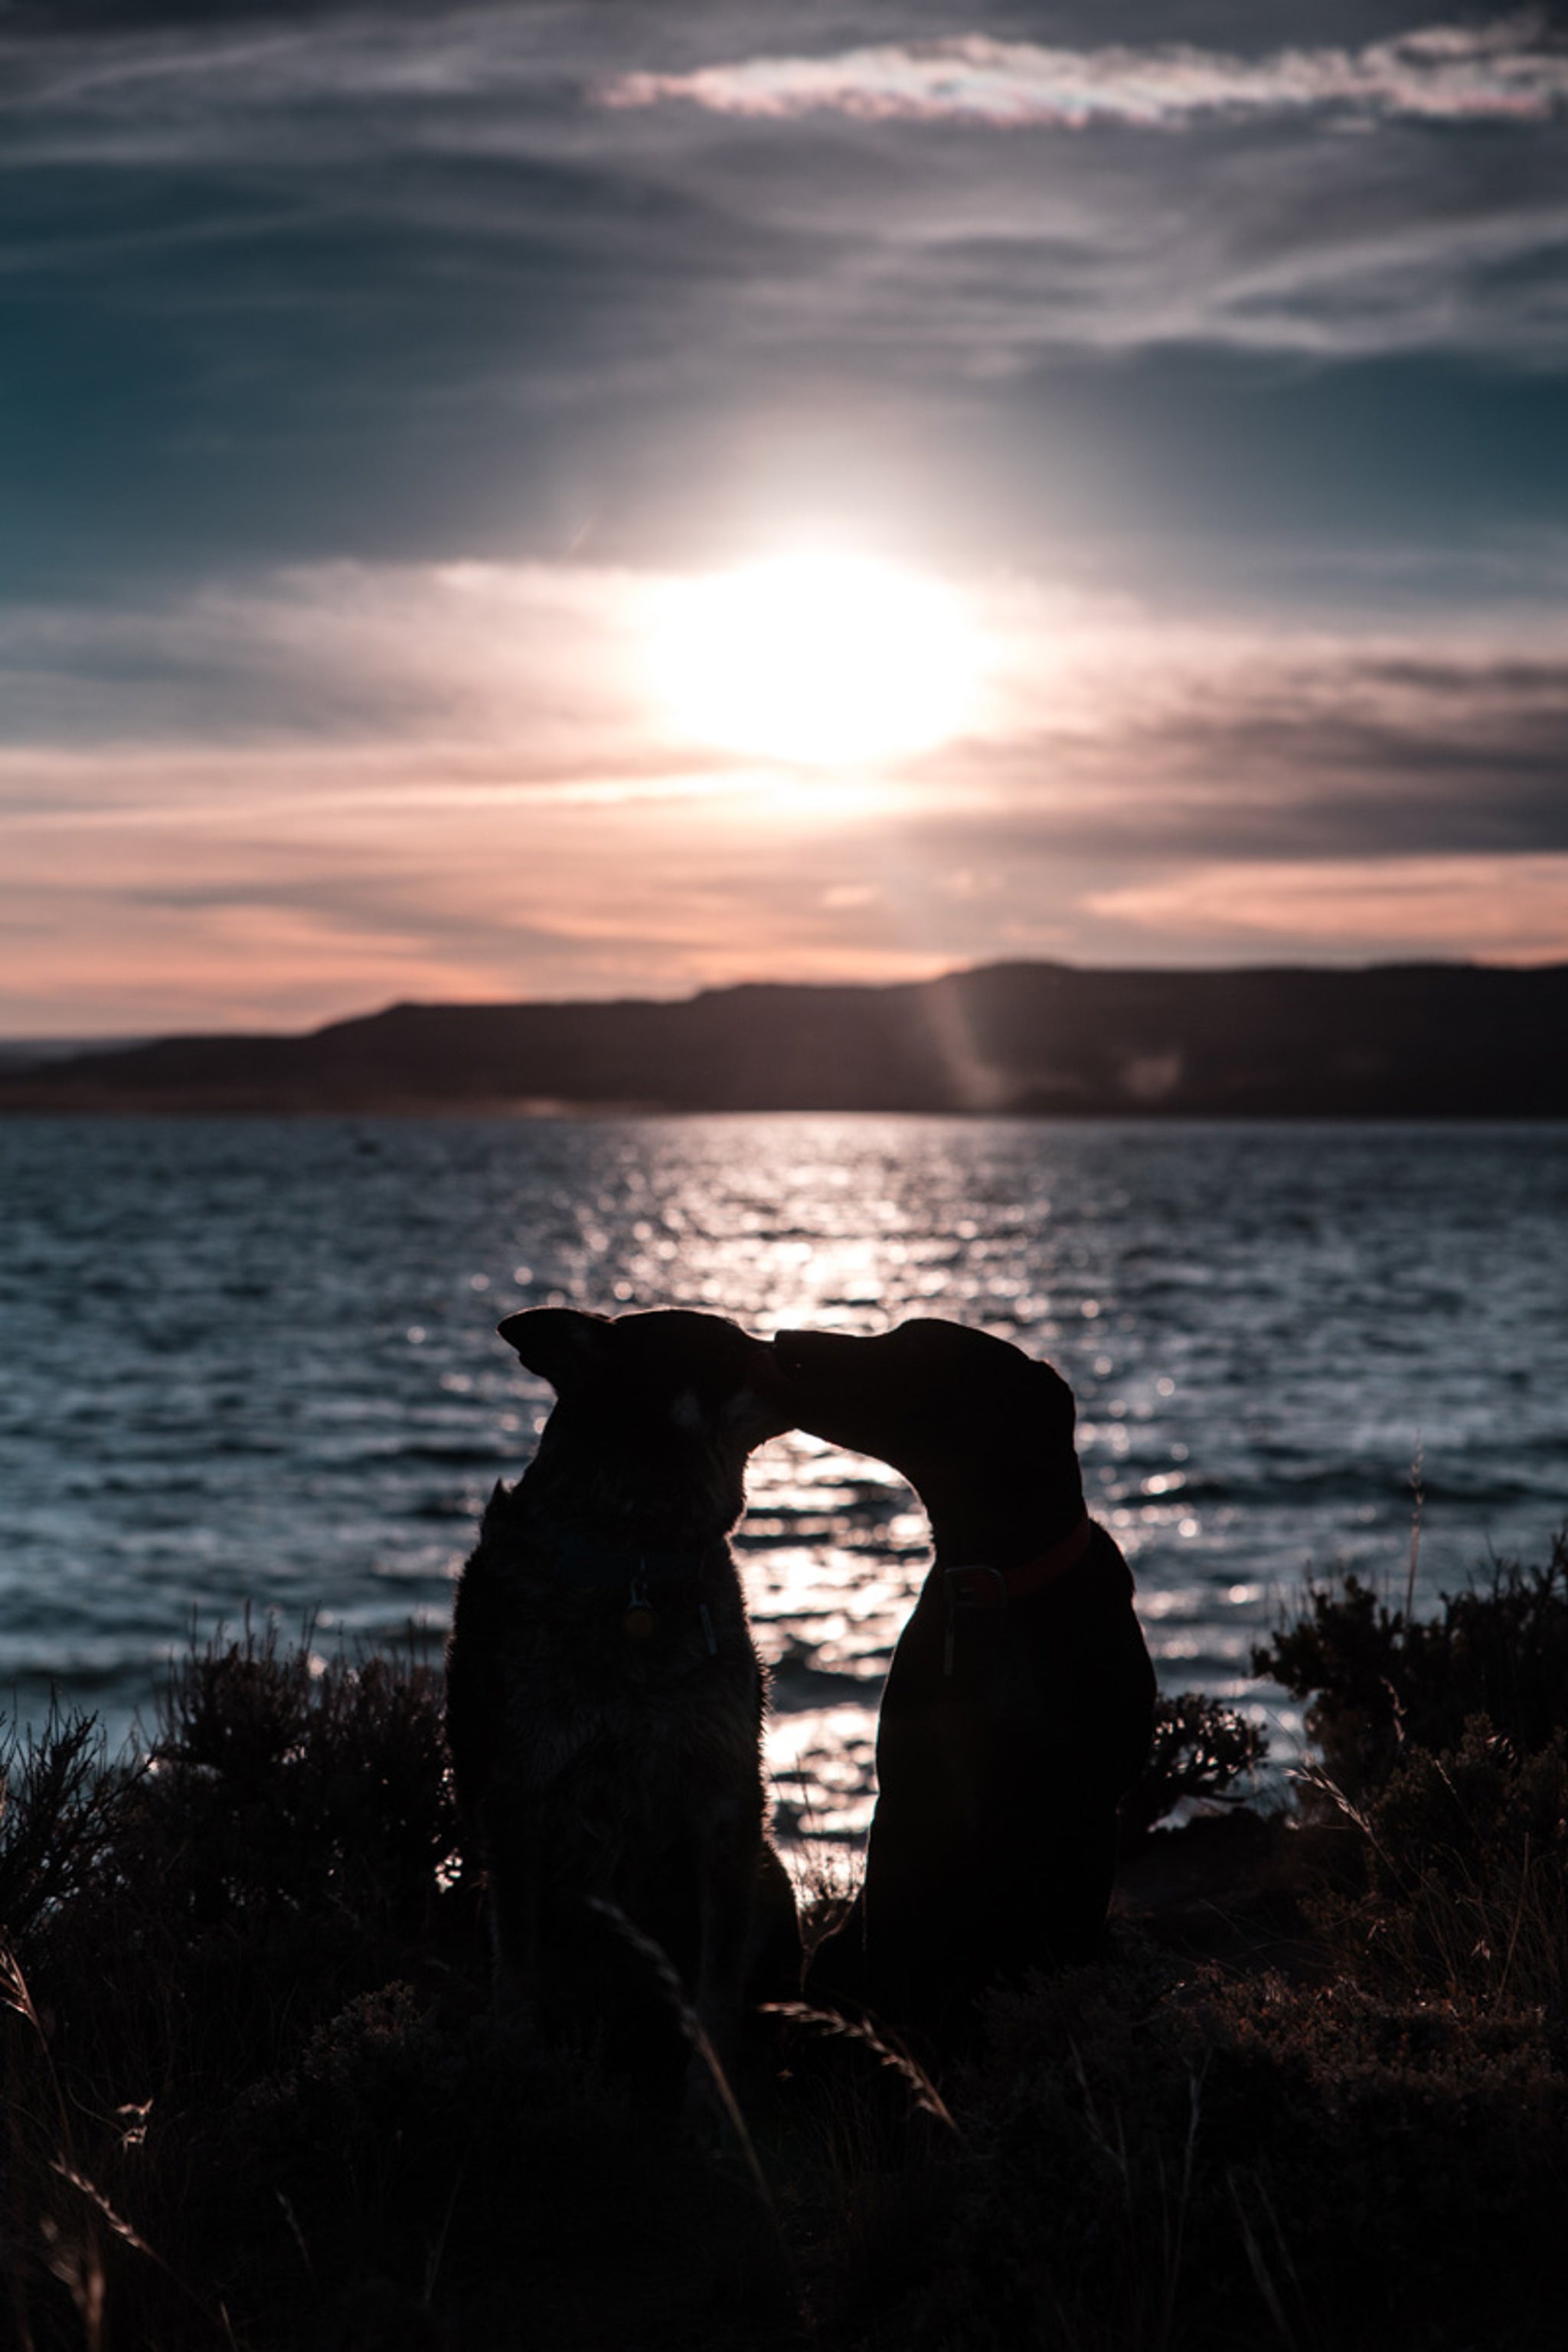 two dogs silhouette in front of sunset over water